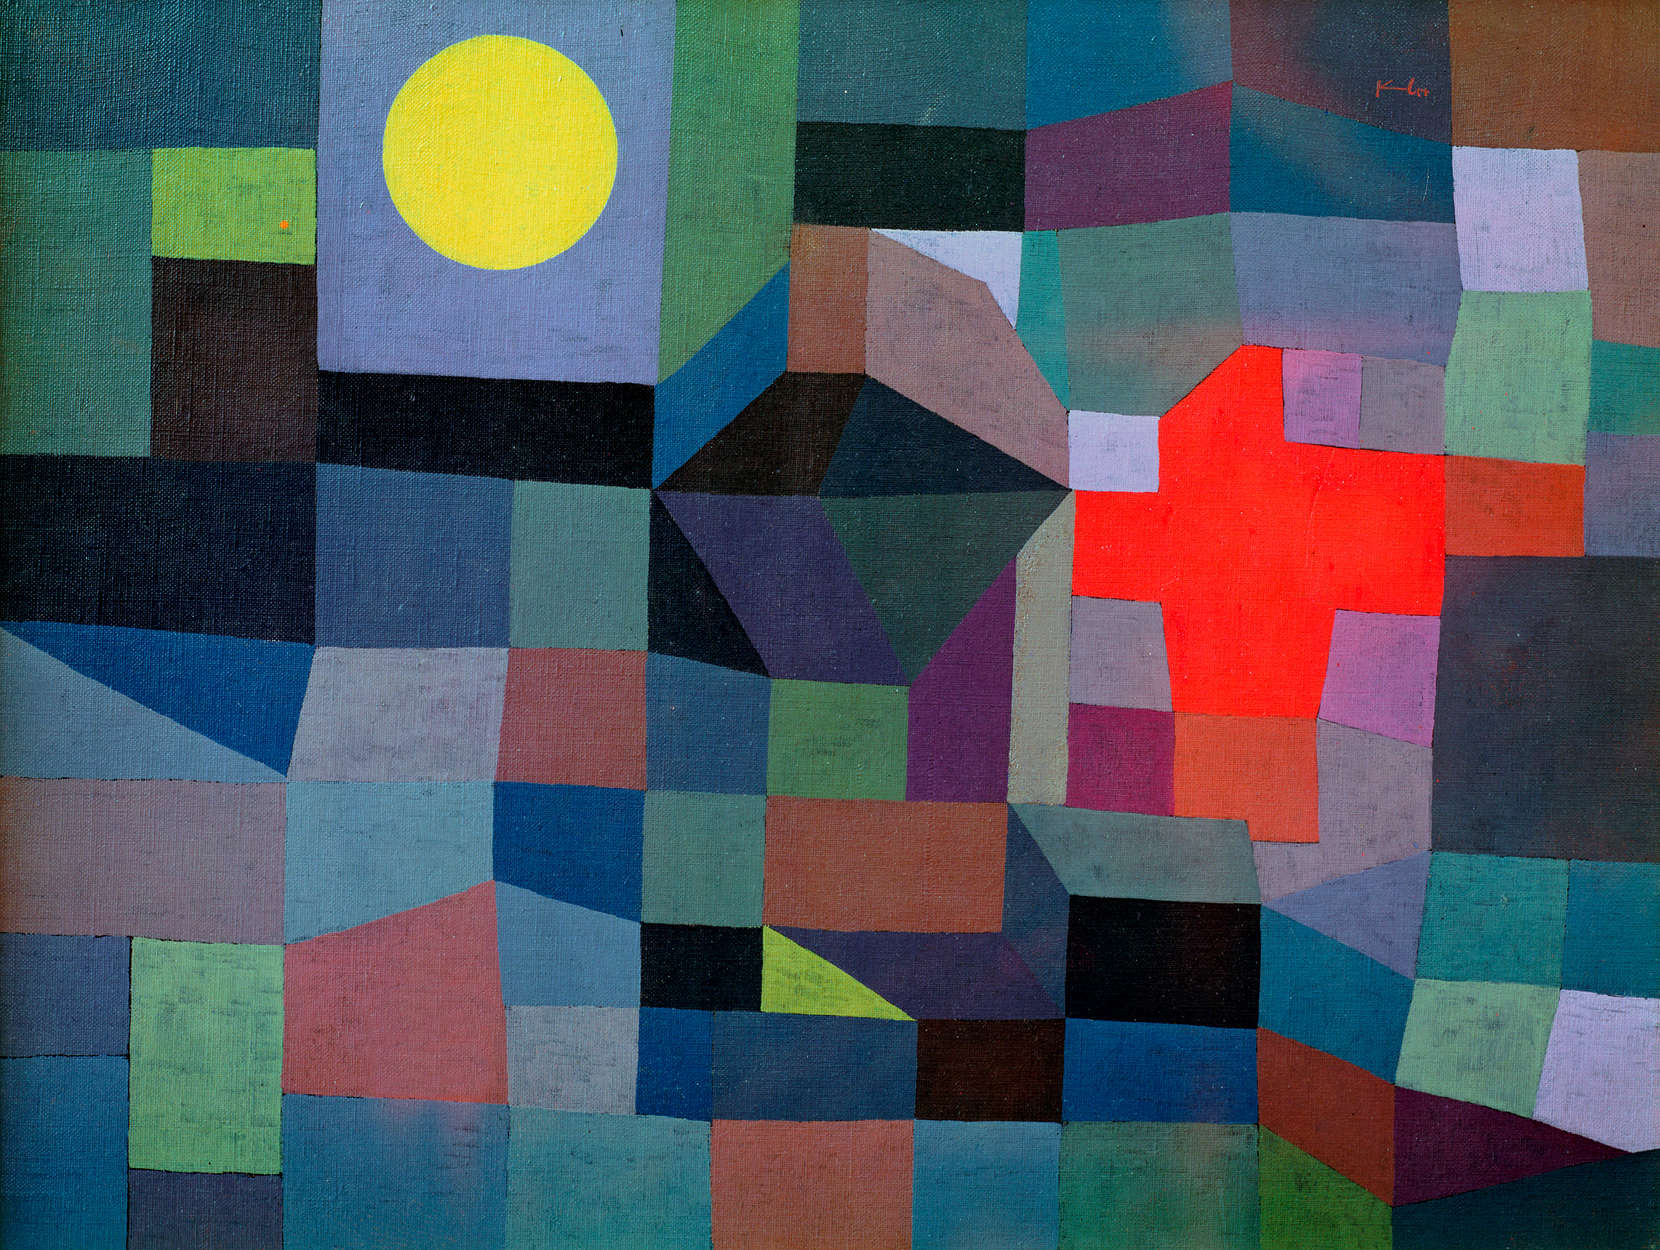             Photo wallpaper "Fire at full moon" by Paul Klee
        